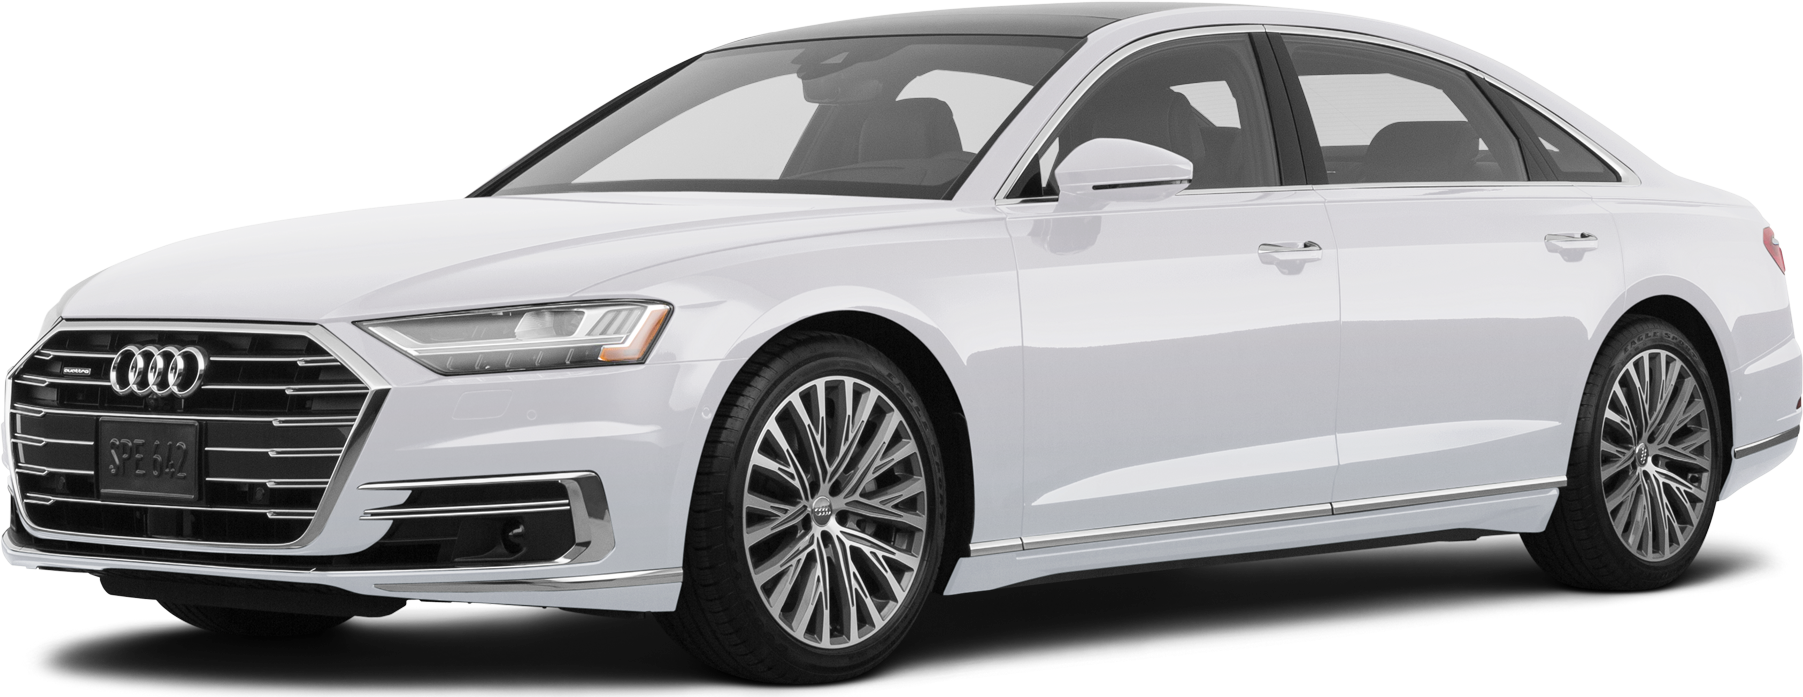 2020 Audi A8 Price Value Ratings And Reviews Kelley Blue Book